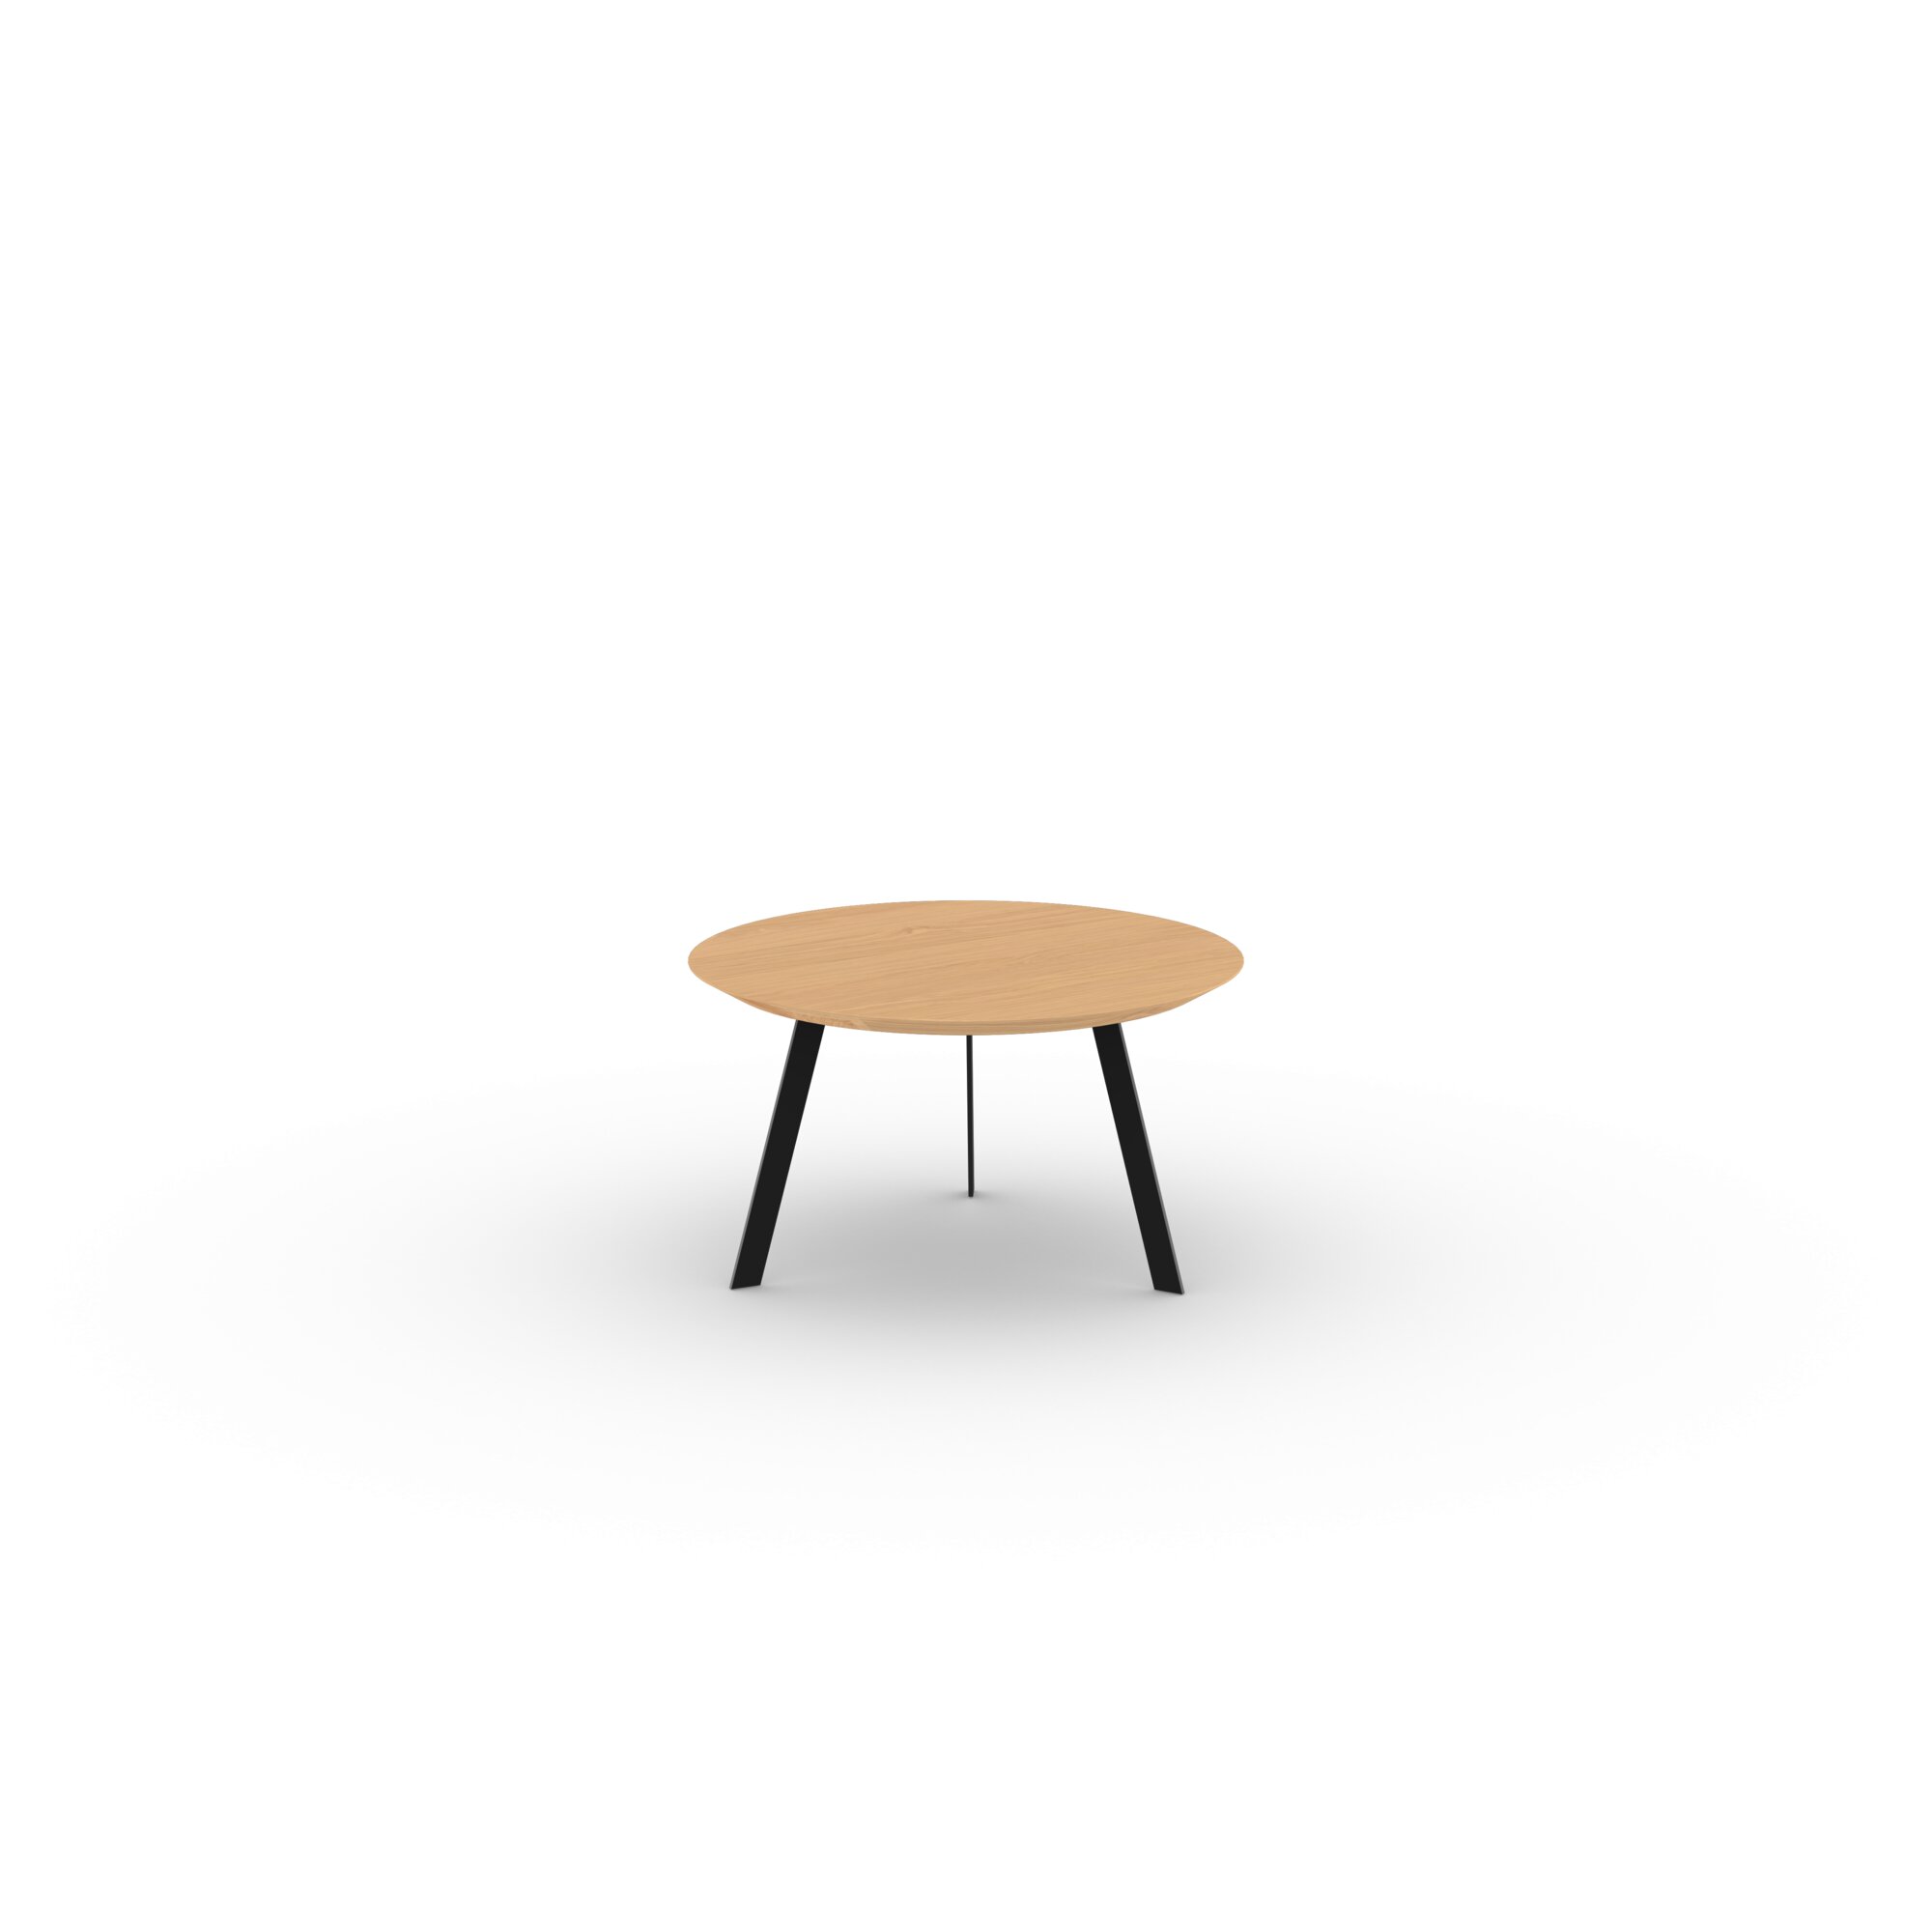 Design Coffee Table | New Co Coffee Table 70 Round Black | Oak hardwax oil natural 3062 | Studio HENK| 